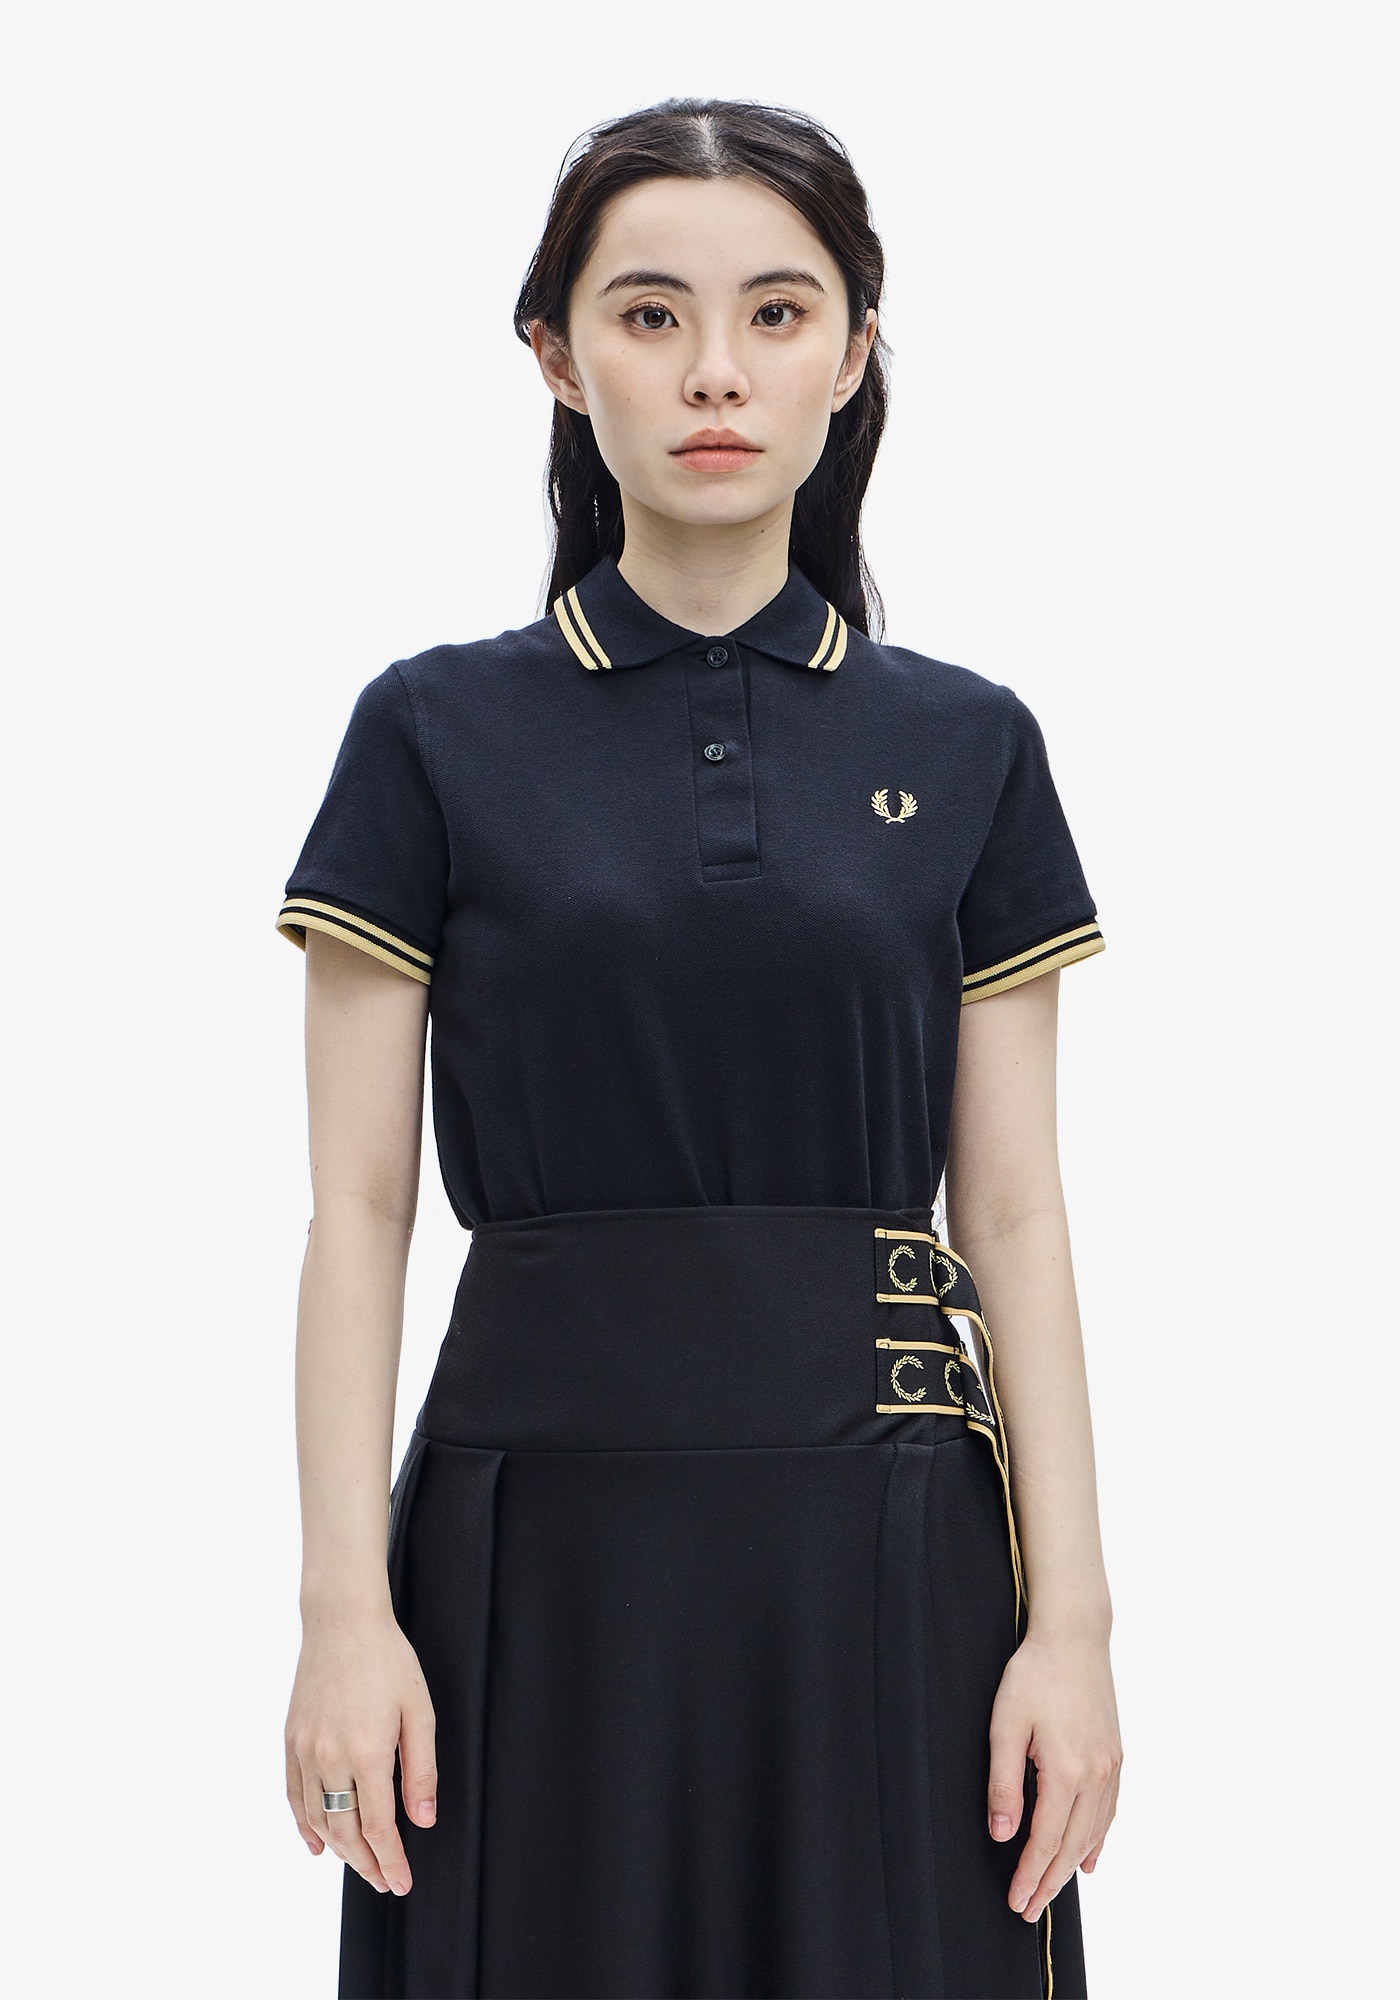 The Fred Perry Shirt - G12|FRED PERRY(フレッドペリー)の通販 